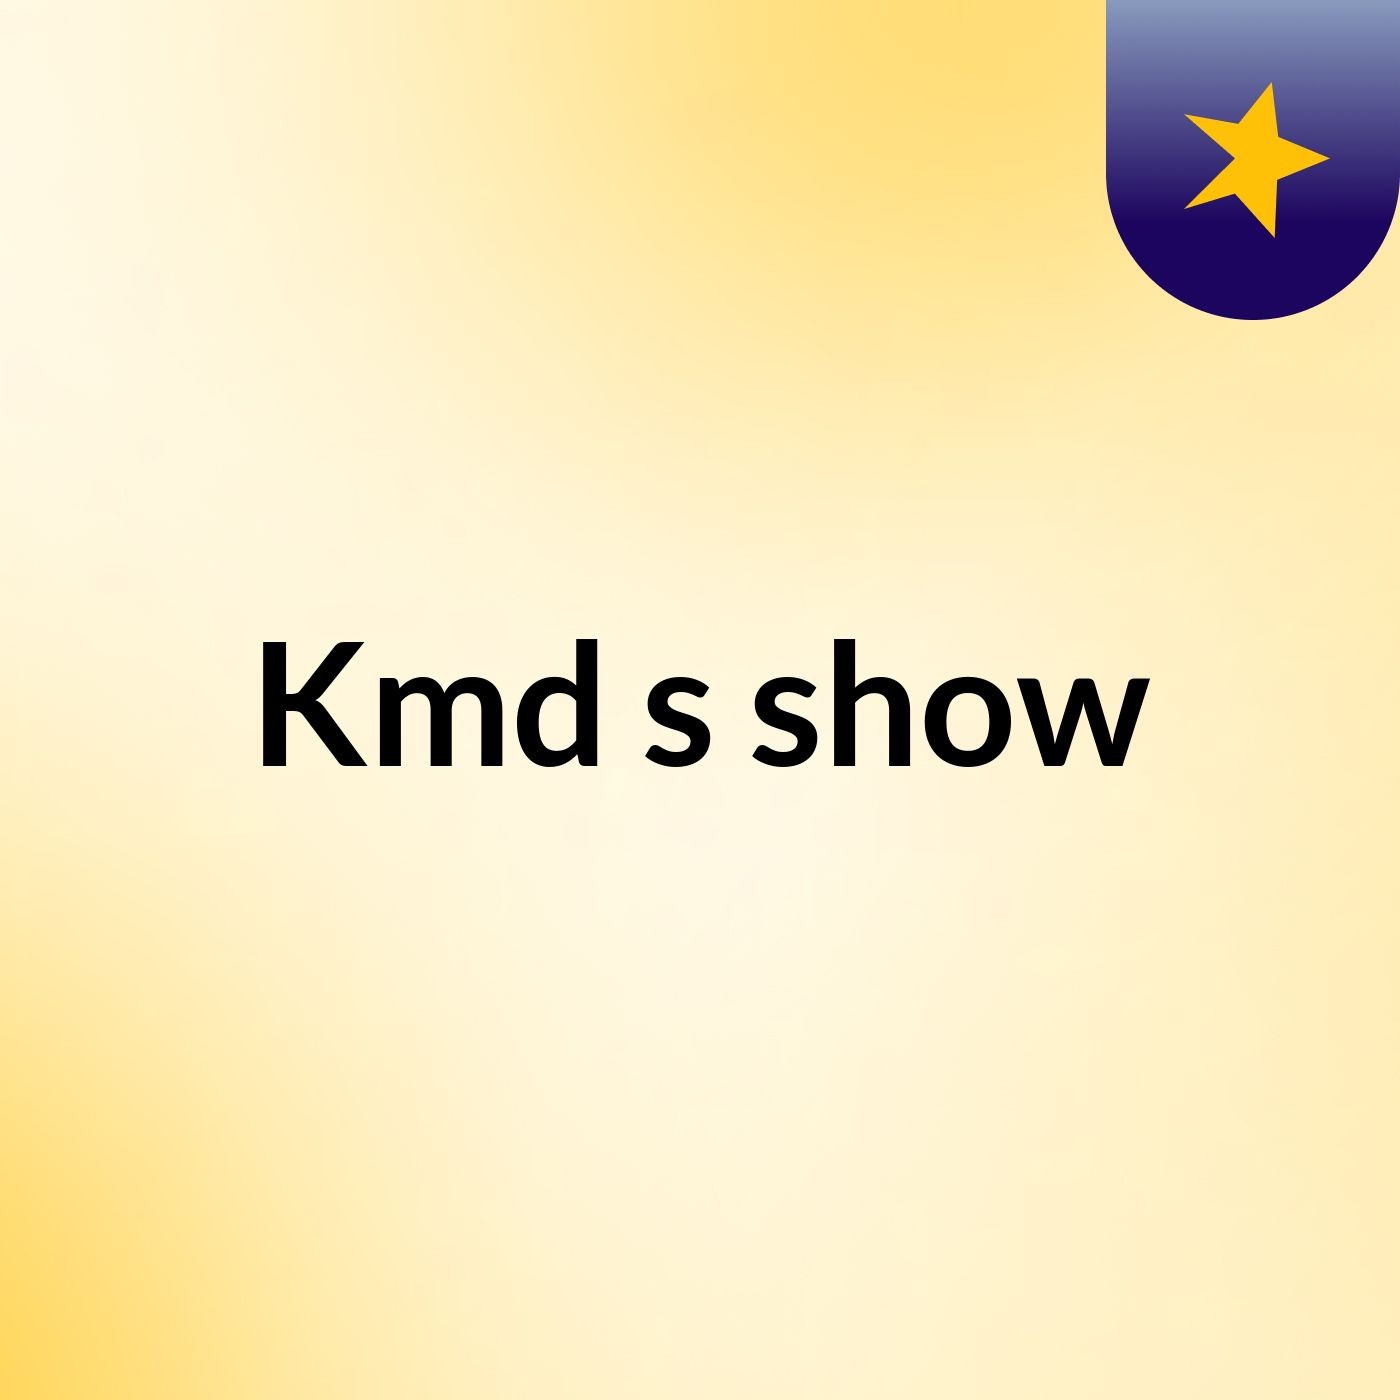 Kmd's show